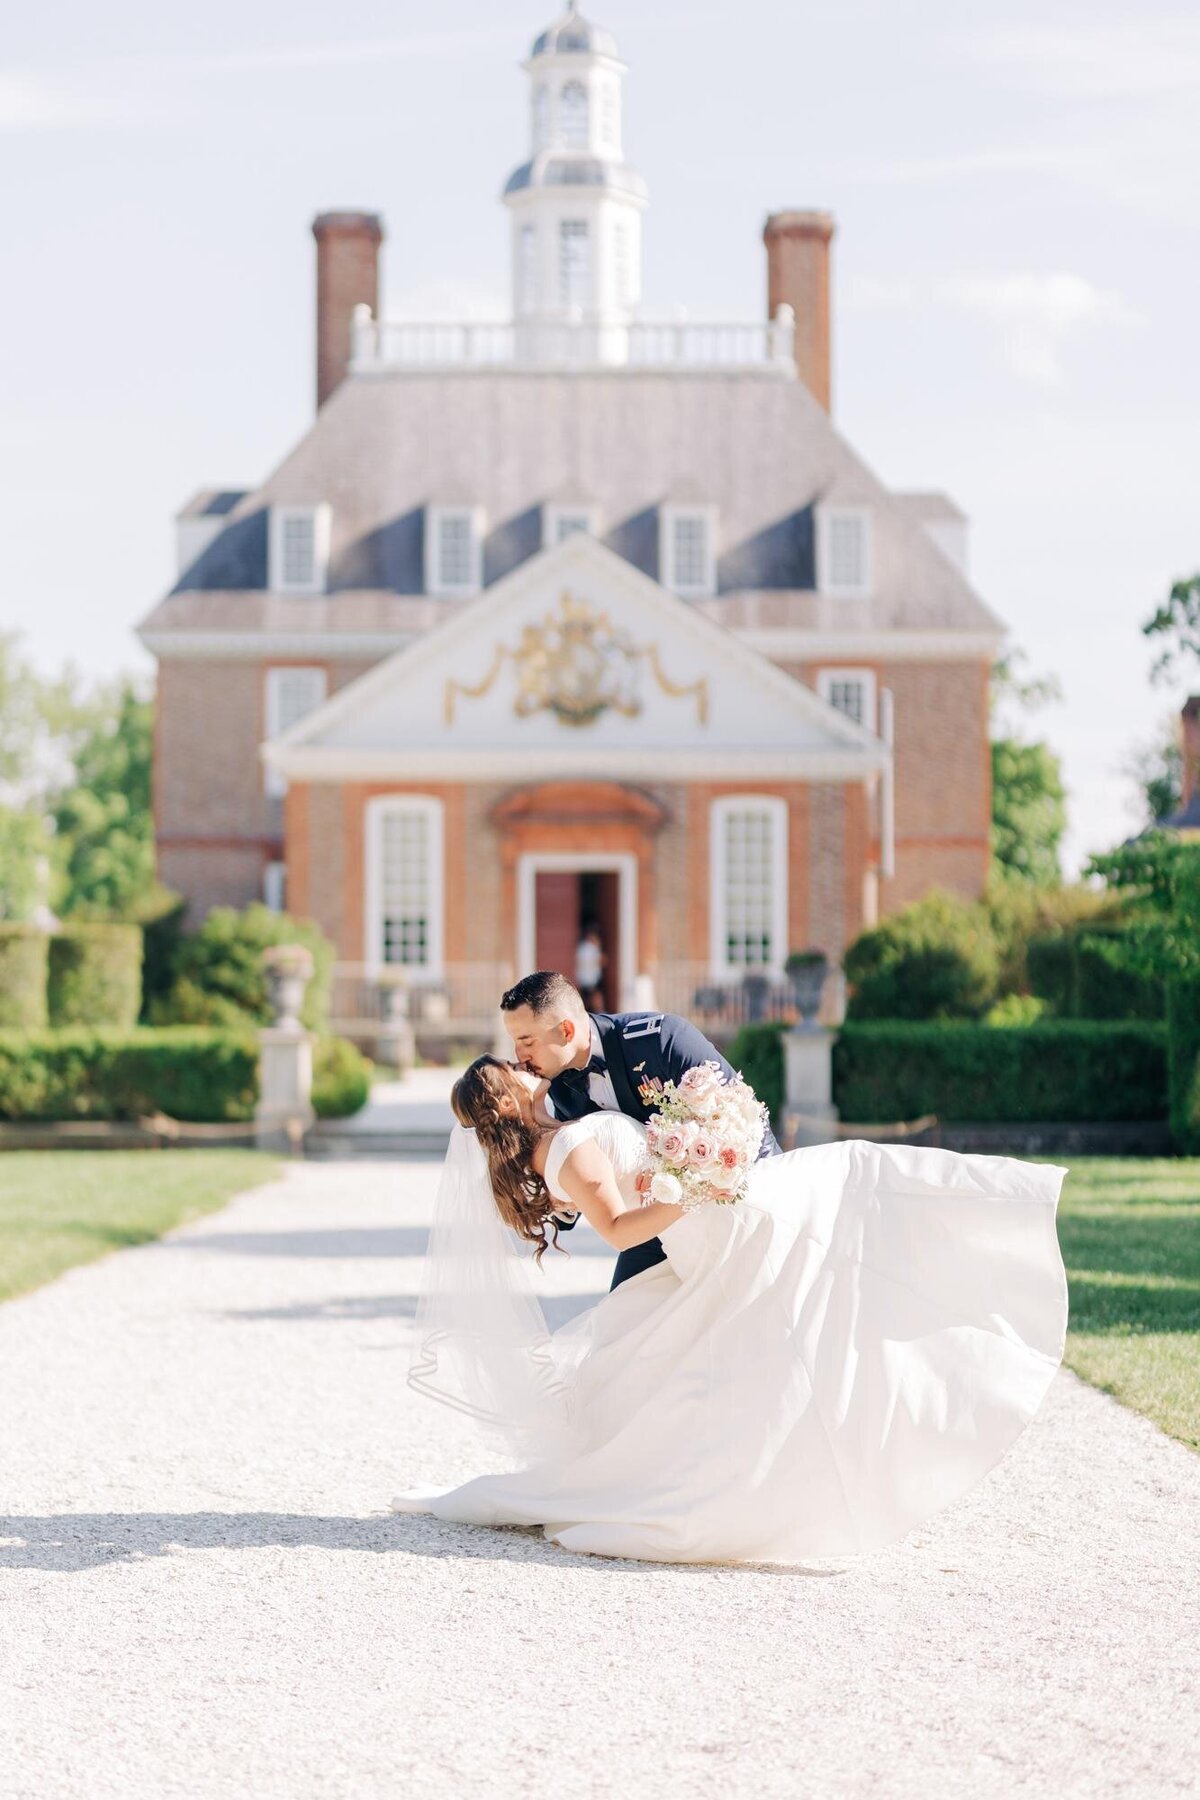 A couple embracing and kissing, with the groom lifting the bride, in front of an elegant manor house on a sunny day.